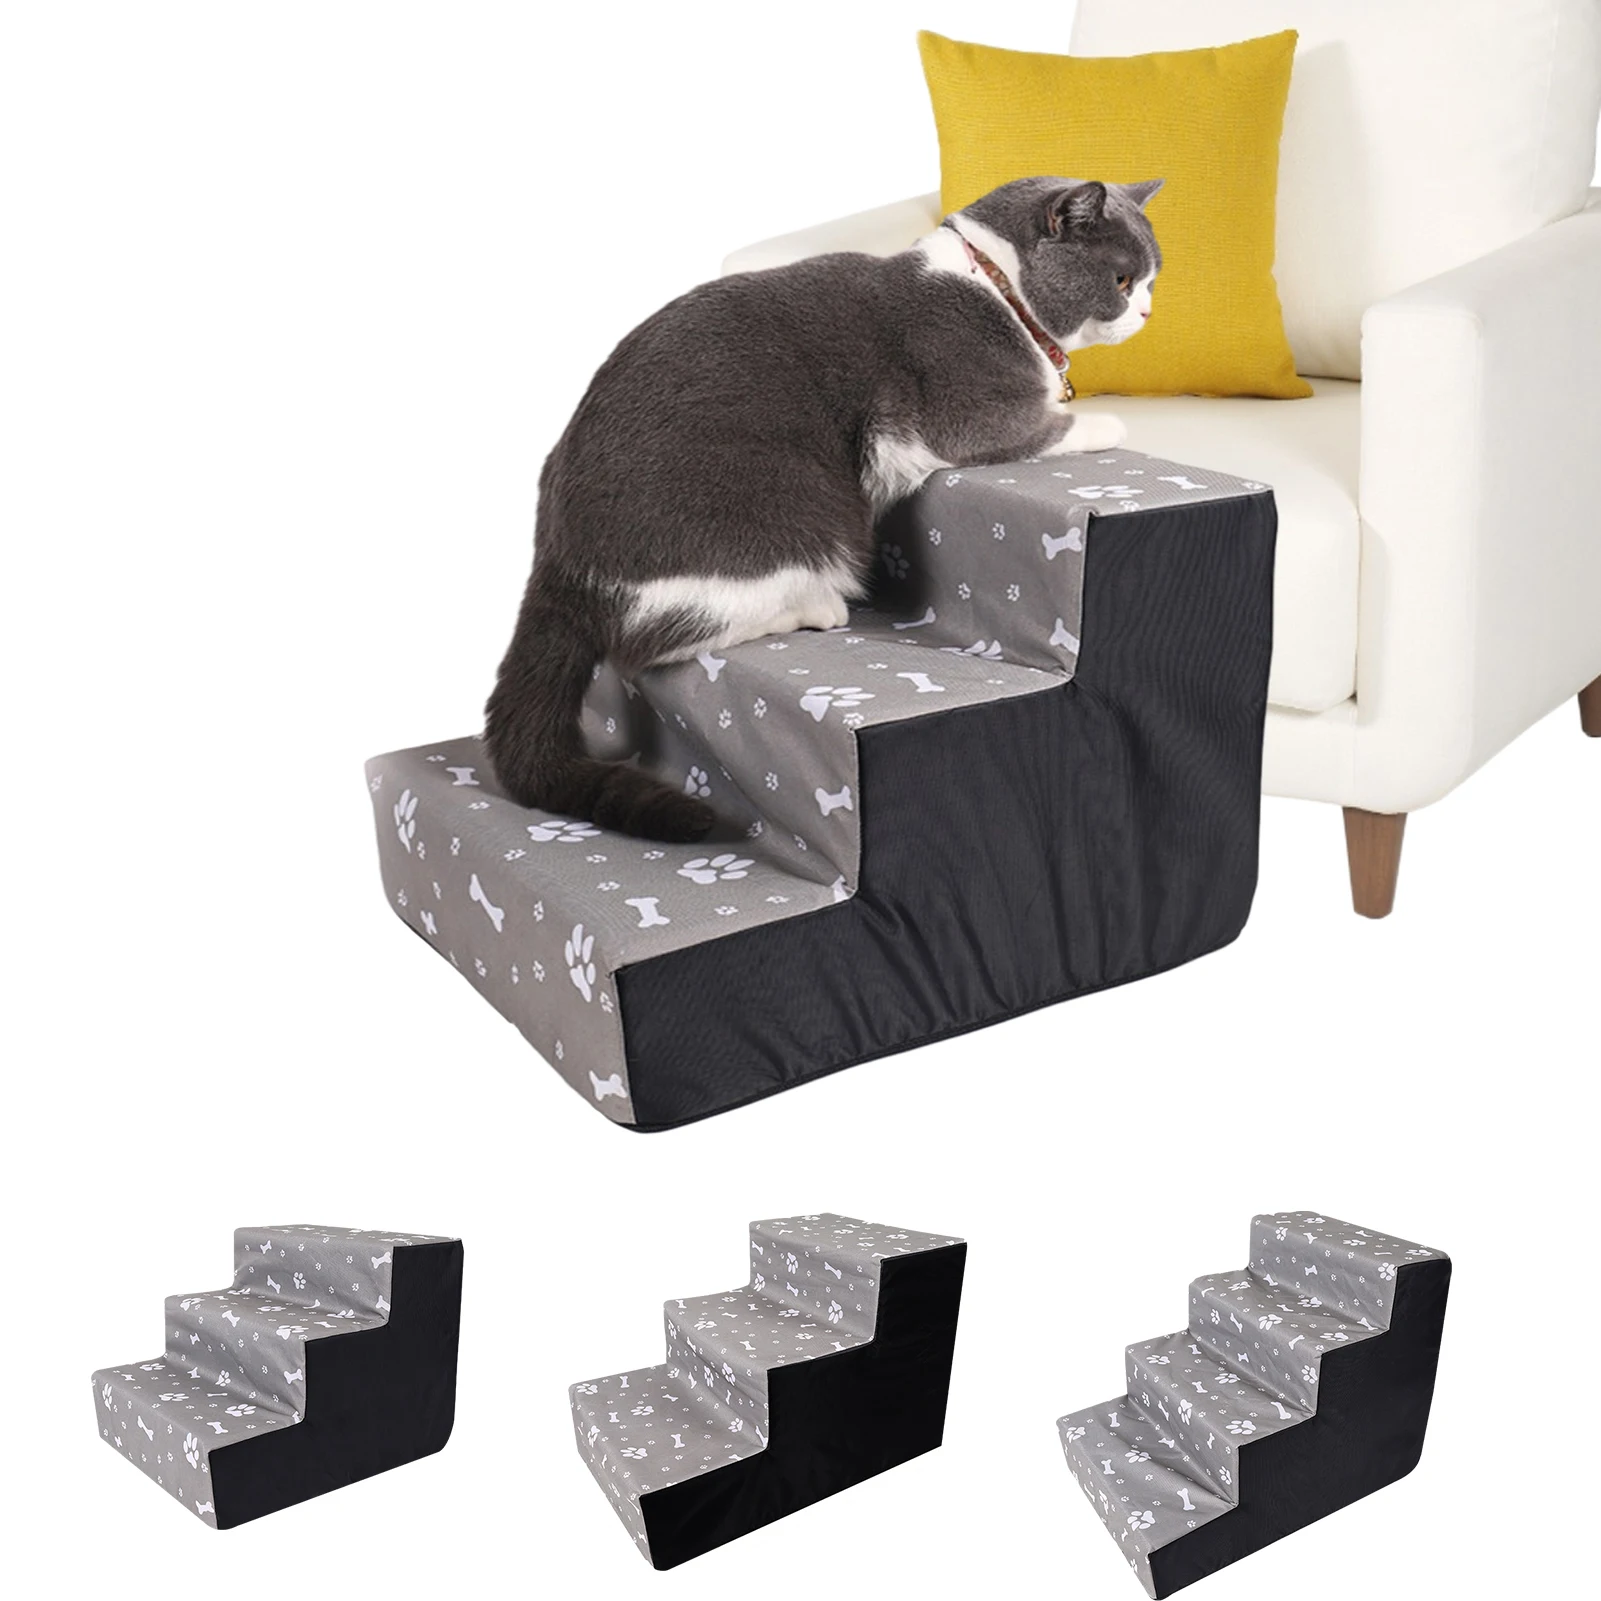 Comfort Pet Stairs 3-Layer/4-Layer Dogs Cats Climbing Ladder Steps Sponge Ladder for Pets Climbing Sofa Or High Beds